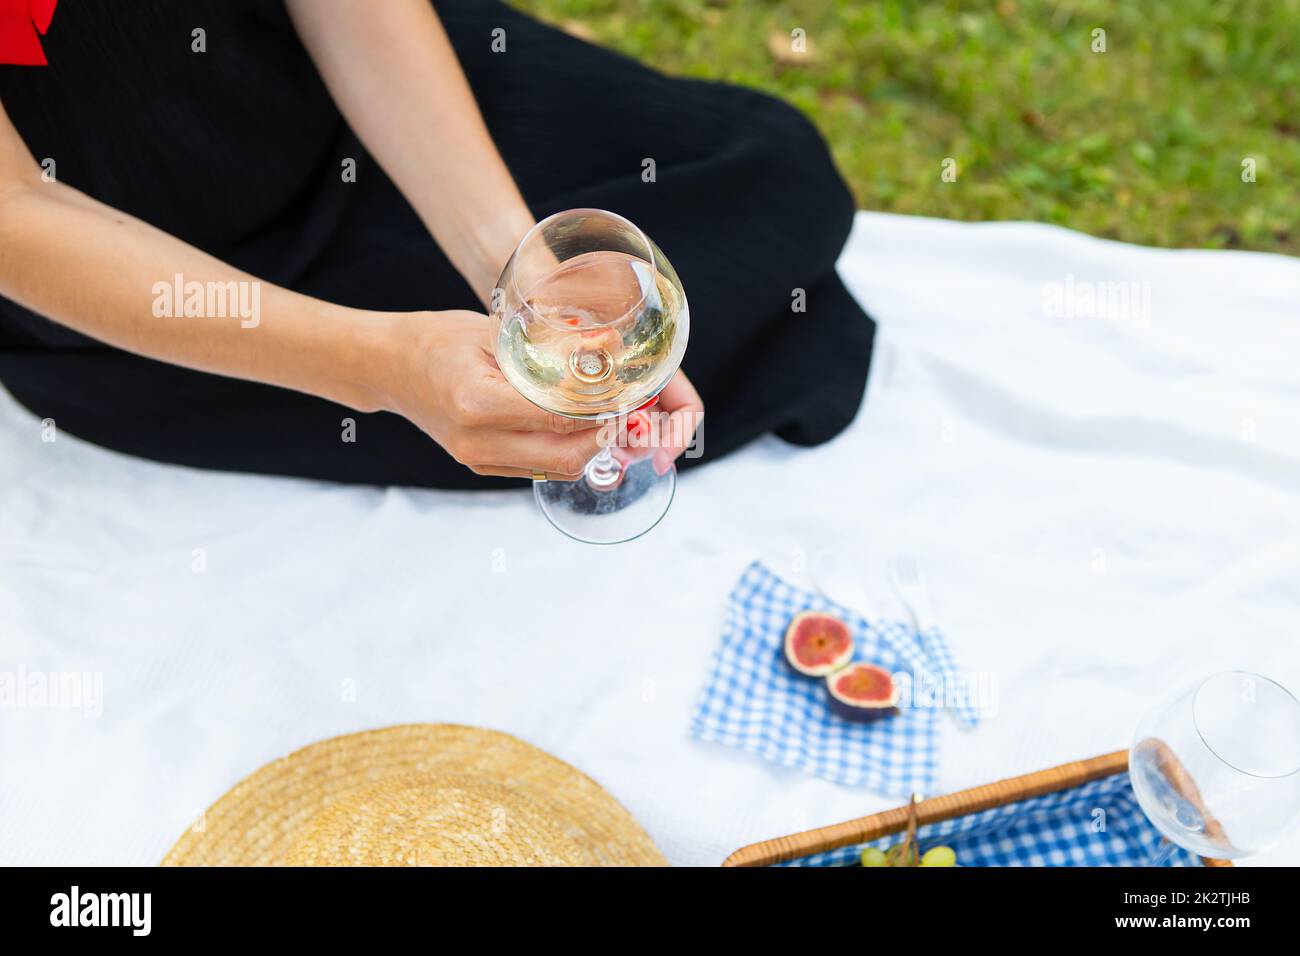 Romantic picnic in the park on the grass, delicious food: basket, wine, grapes, figs, cheese, blue checkered tablecloth, two glasses of wine. The girl is holding a glass of wine in her hands.The concept of outdoor recreation. Stock Photo